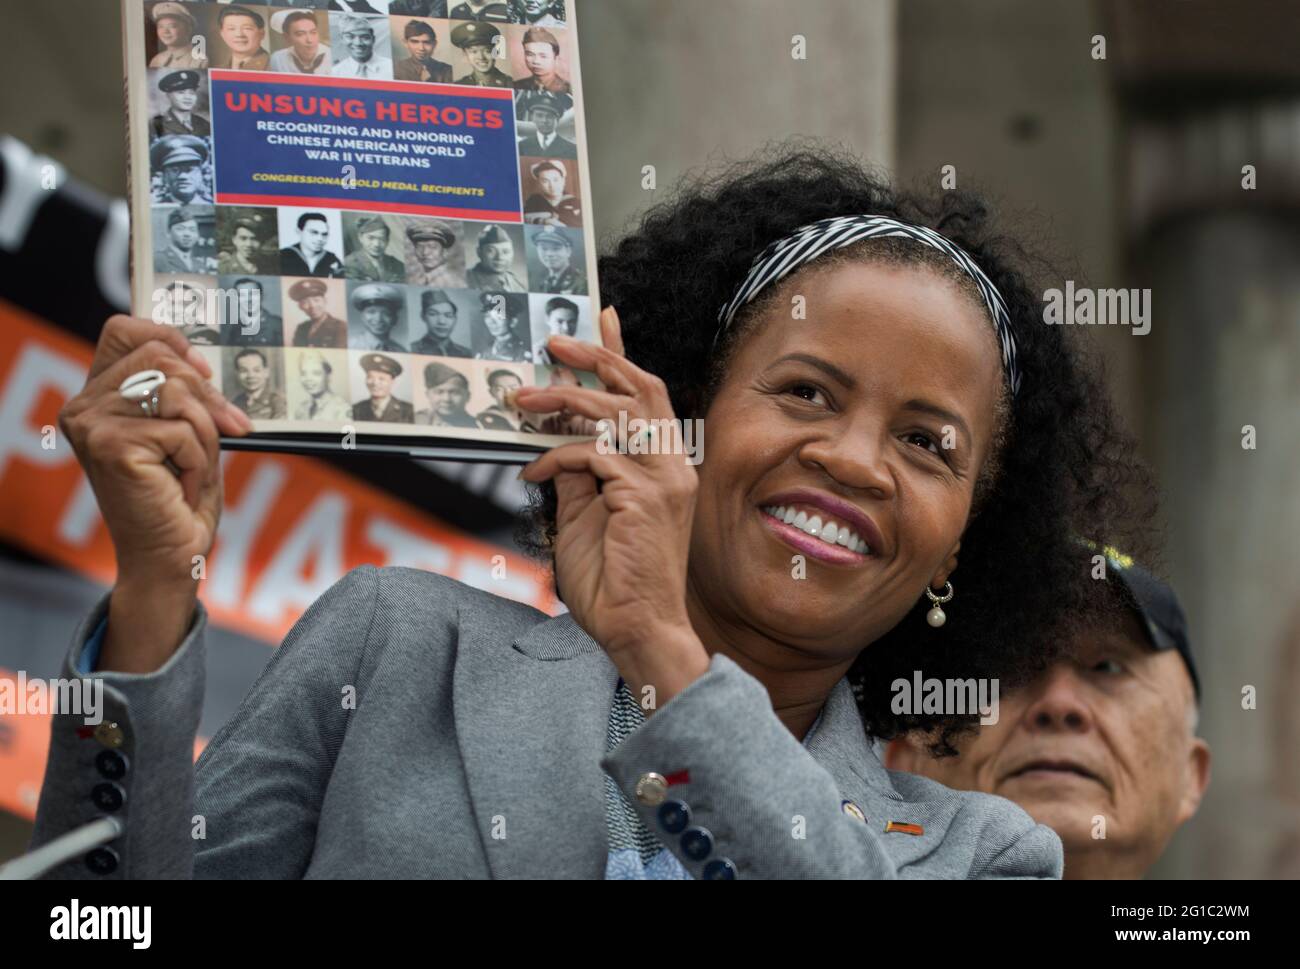 Kim Janey, 56, acting Mayor of Boston, Massachusetts USA. 31 May 2021. Janey is shown holding a copy of the book ‘Recognizing and Honoring Chinese American World War II Veterans-Congressional Gold Medal Recipients’ on Parkman Band Stand in the Boston Common during the National Day of Solidarity Against Asian American and Pacific Islanders (AAPI) Hate. The book was presented to her by retired U.S. Army Major General William Chen. General Chen, the highest ranking Chinese American to serve in the U.S. Army is shown in standing behind Janey. Stock Photo